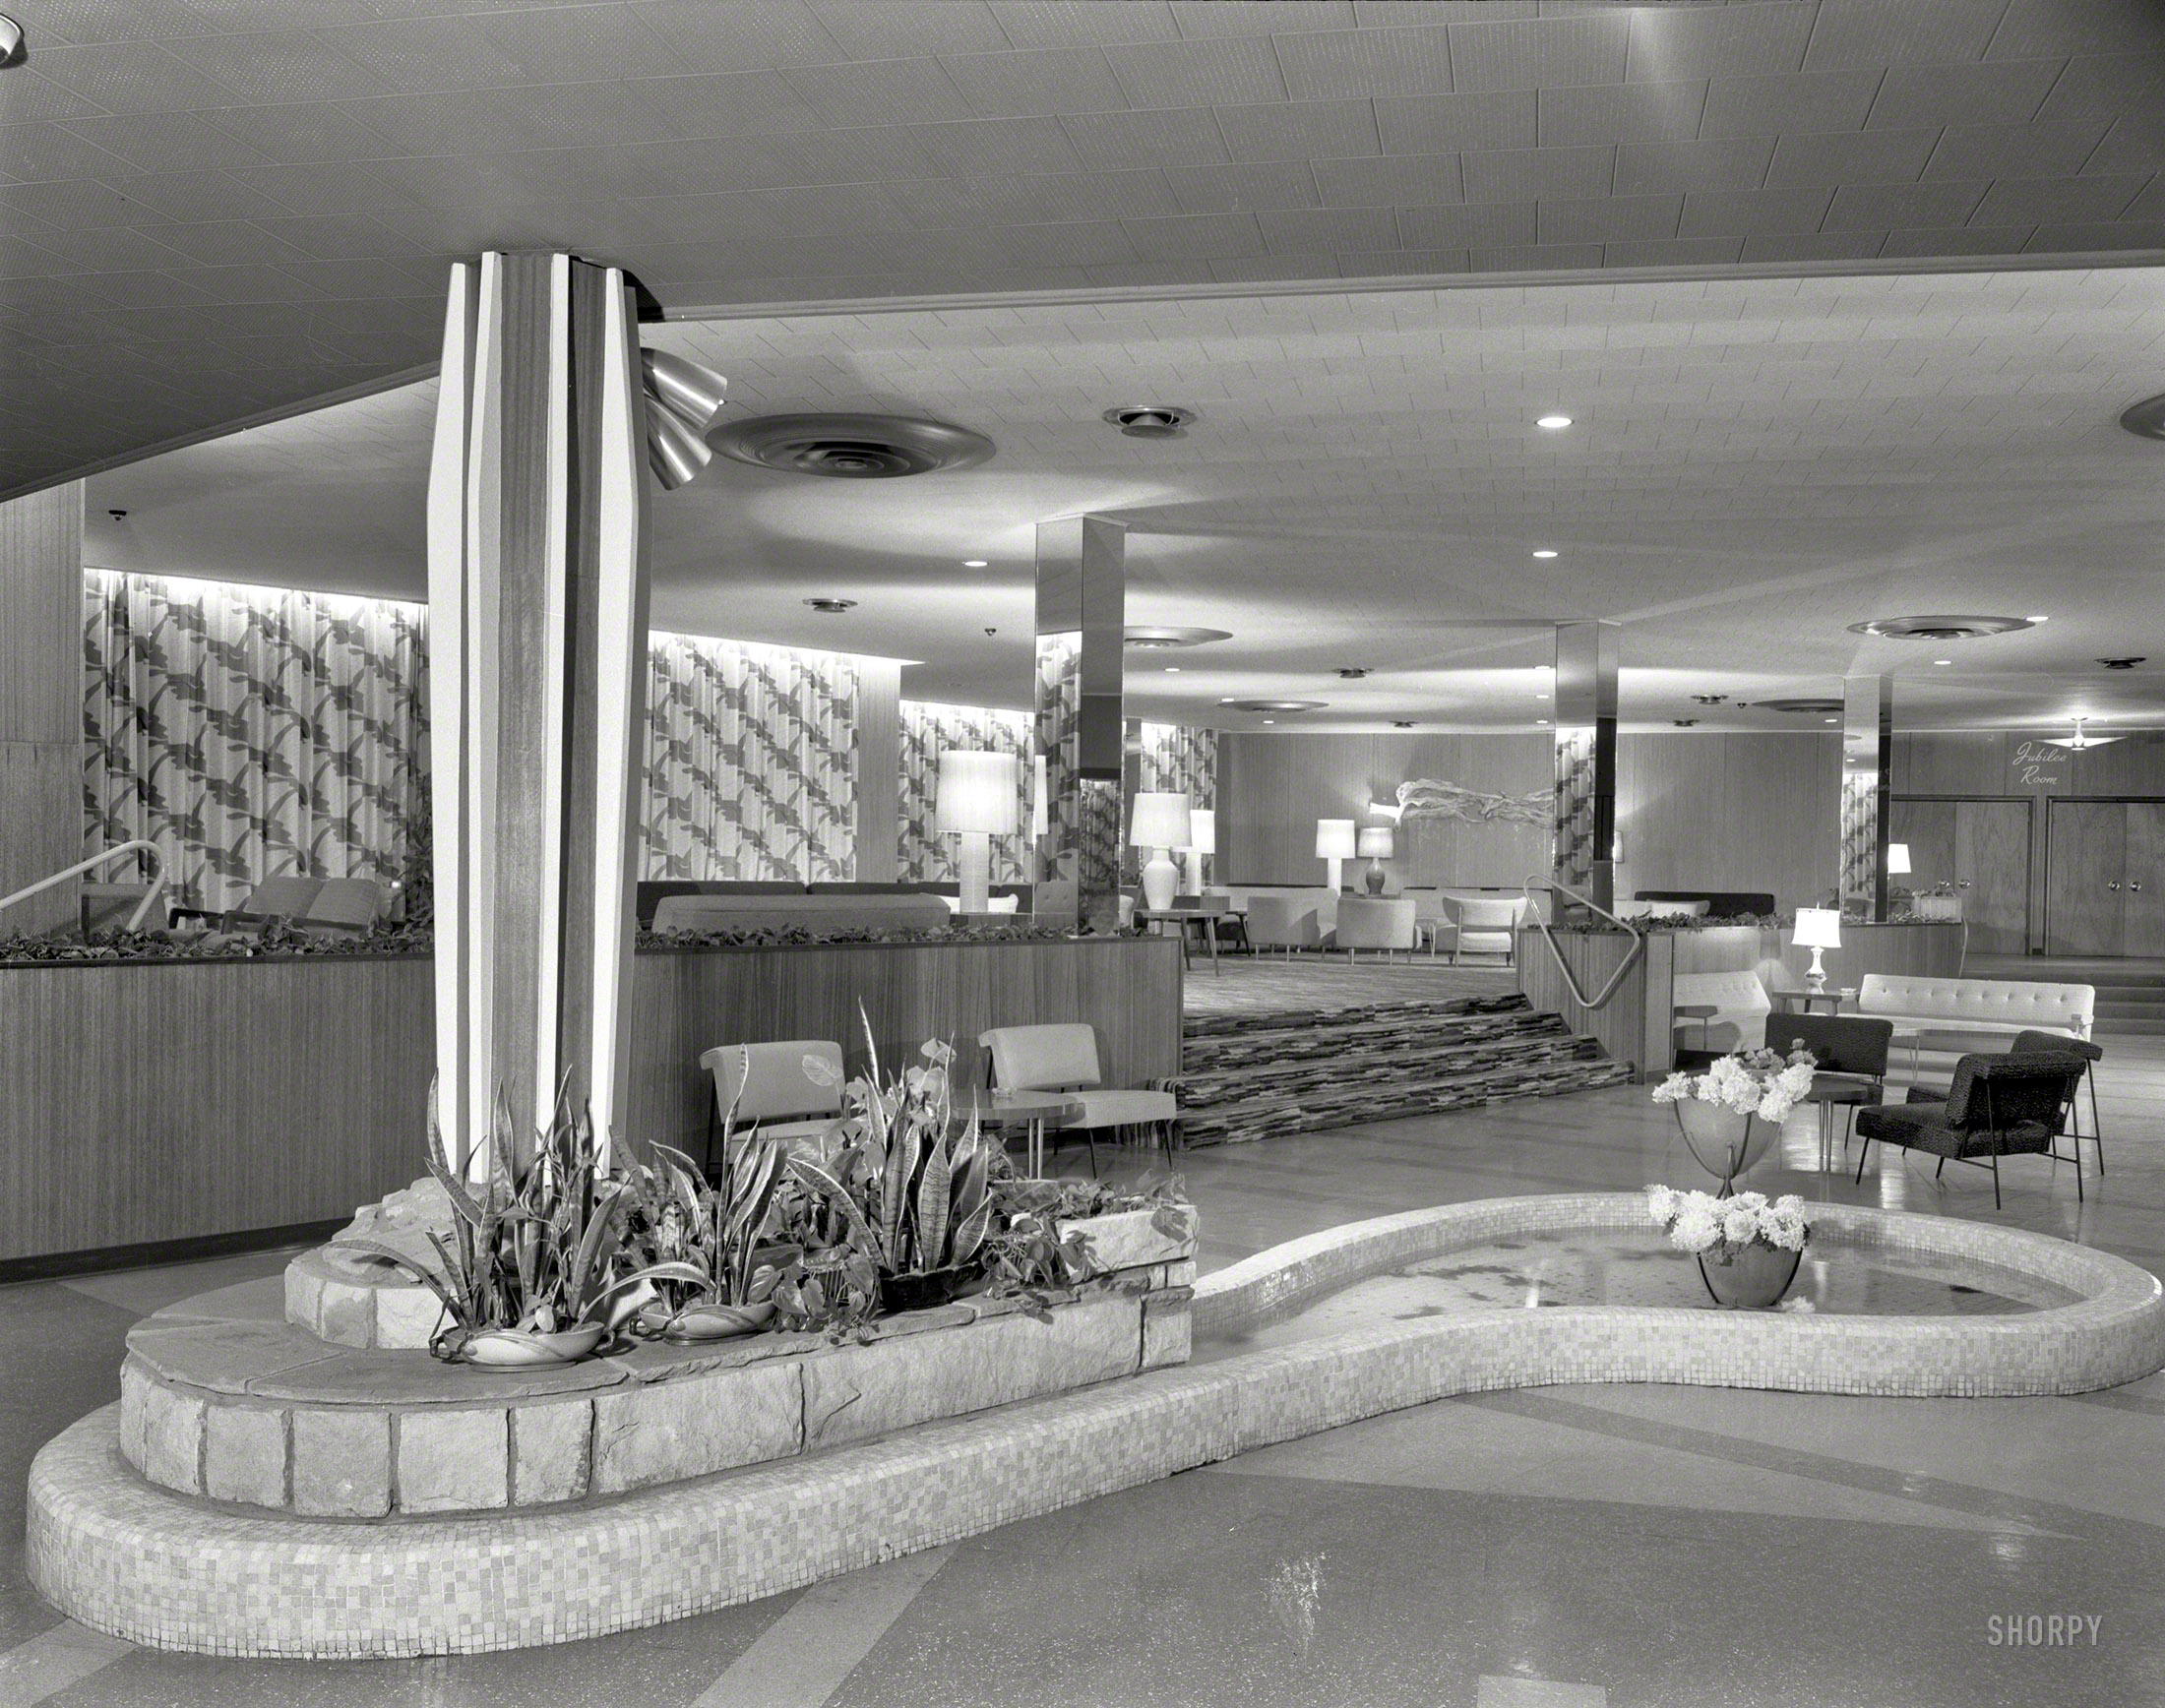 August 13, 1957. "Hotel Zeiger. Ellenville, New York. General lobby." Join us in the Jubilee Room for cocktails and dancing! That stair rail looks like it was filched off a pool table. Large format negative by Gottscho-Schleisner. View full size.